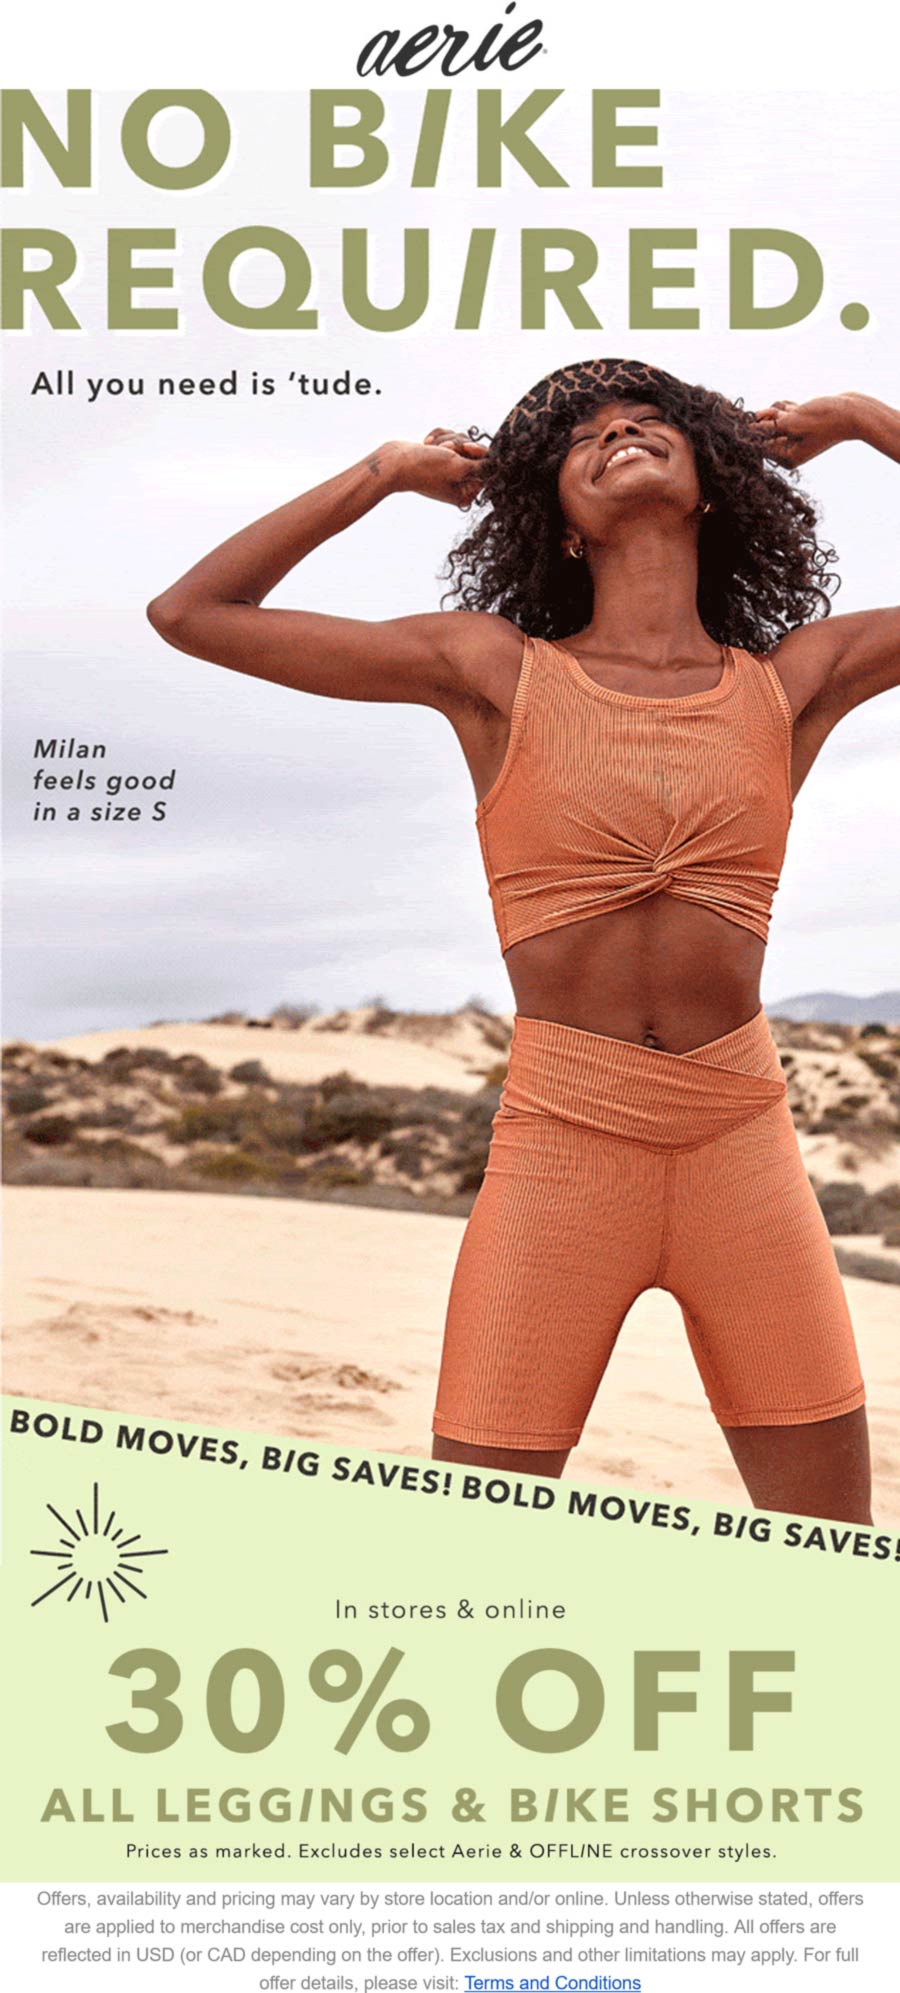 Aerie stores Coupon  30% off all leggings & bike shorts at Aerie, ditto online #aerie 